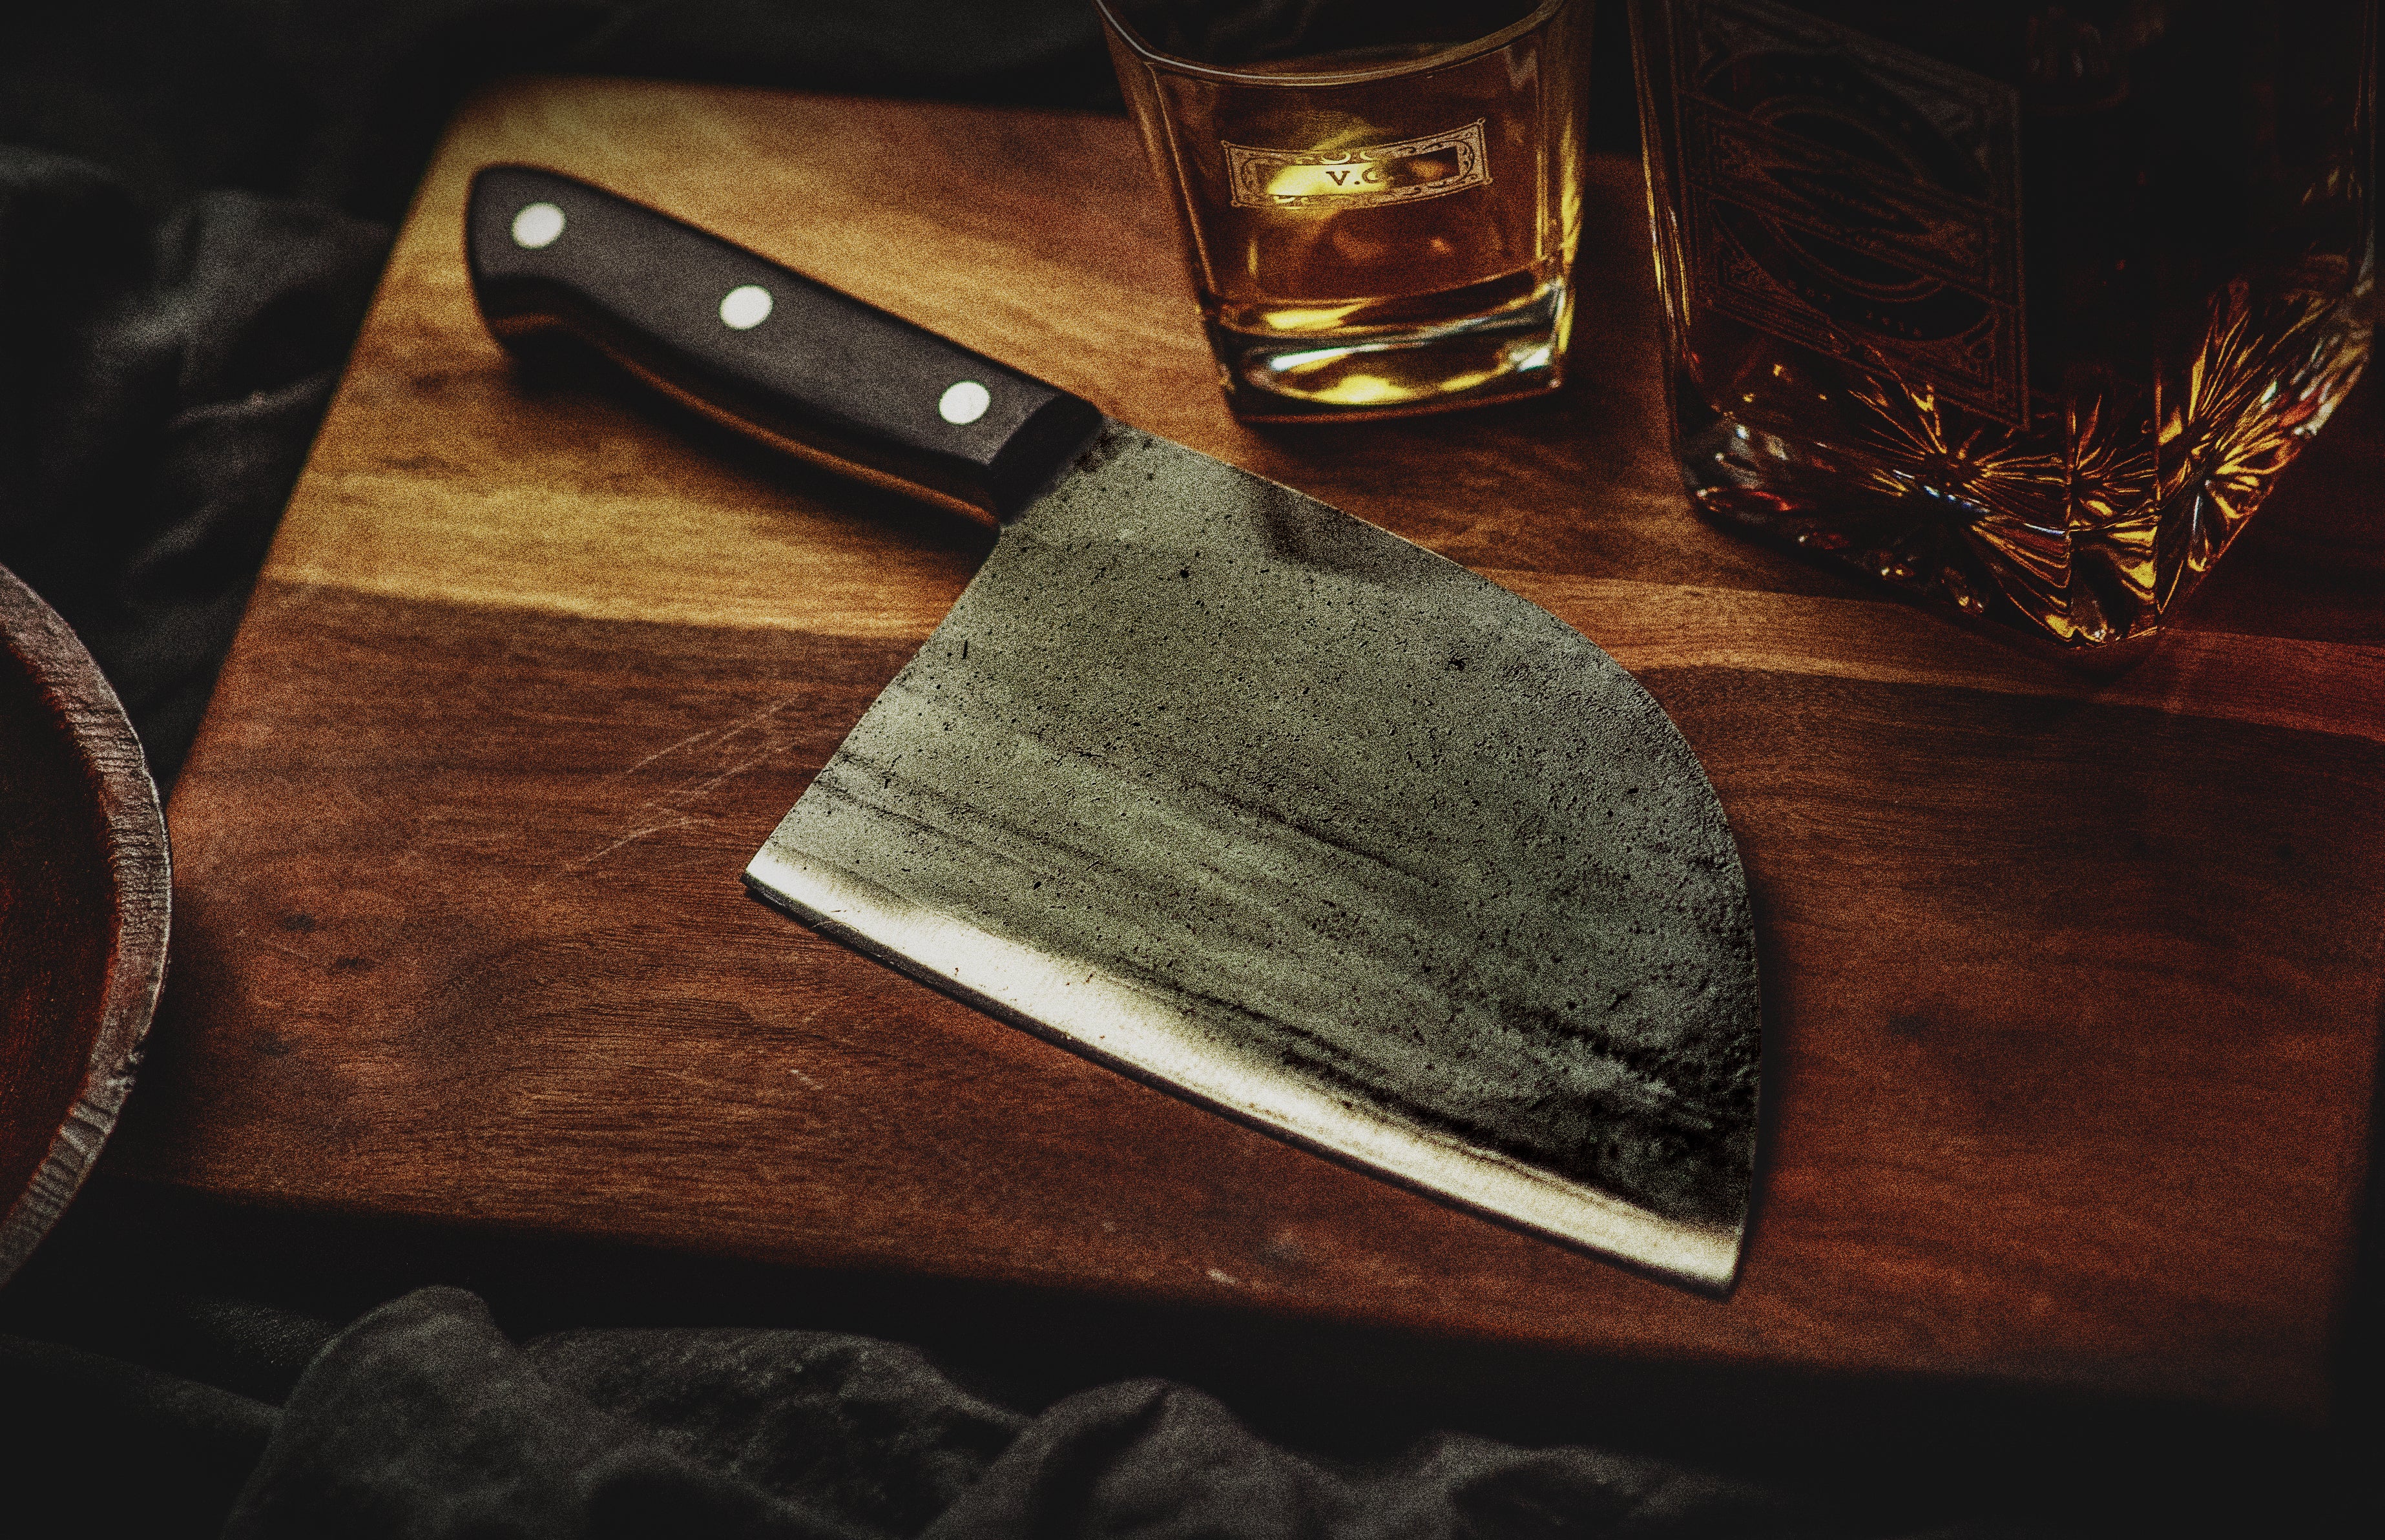 ENOKING Meat Cleaver Hand Forged Serbian Chefs Knife 